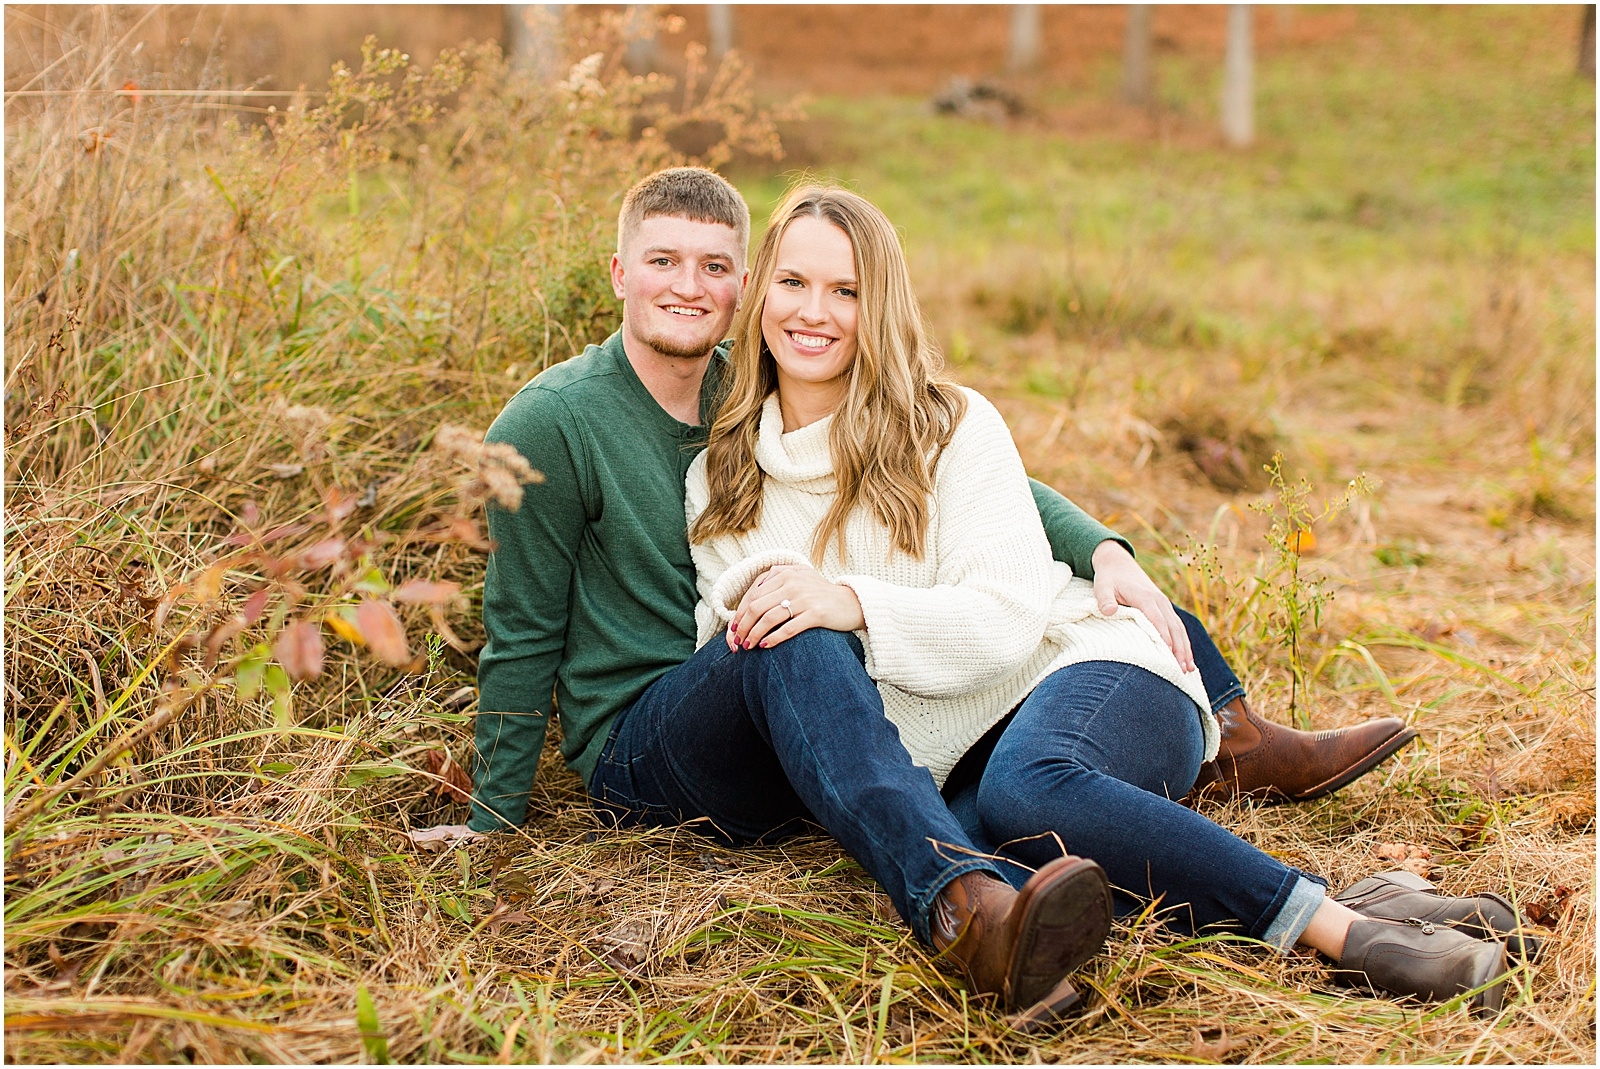 A Fall Southern Indiana Engagement Seesion | Cody and Hannah | Bret and Brandie Photography 034.jpg